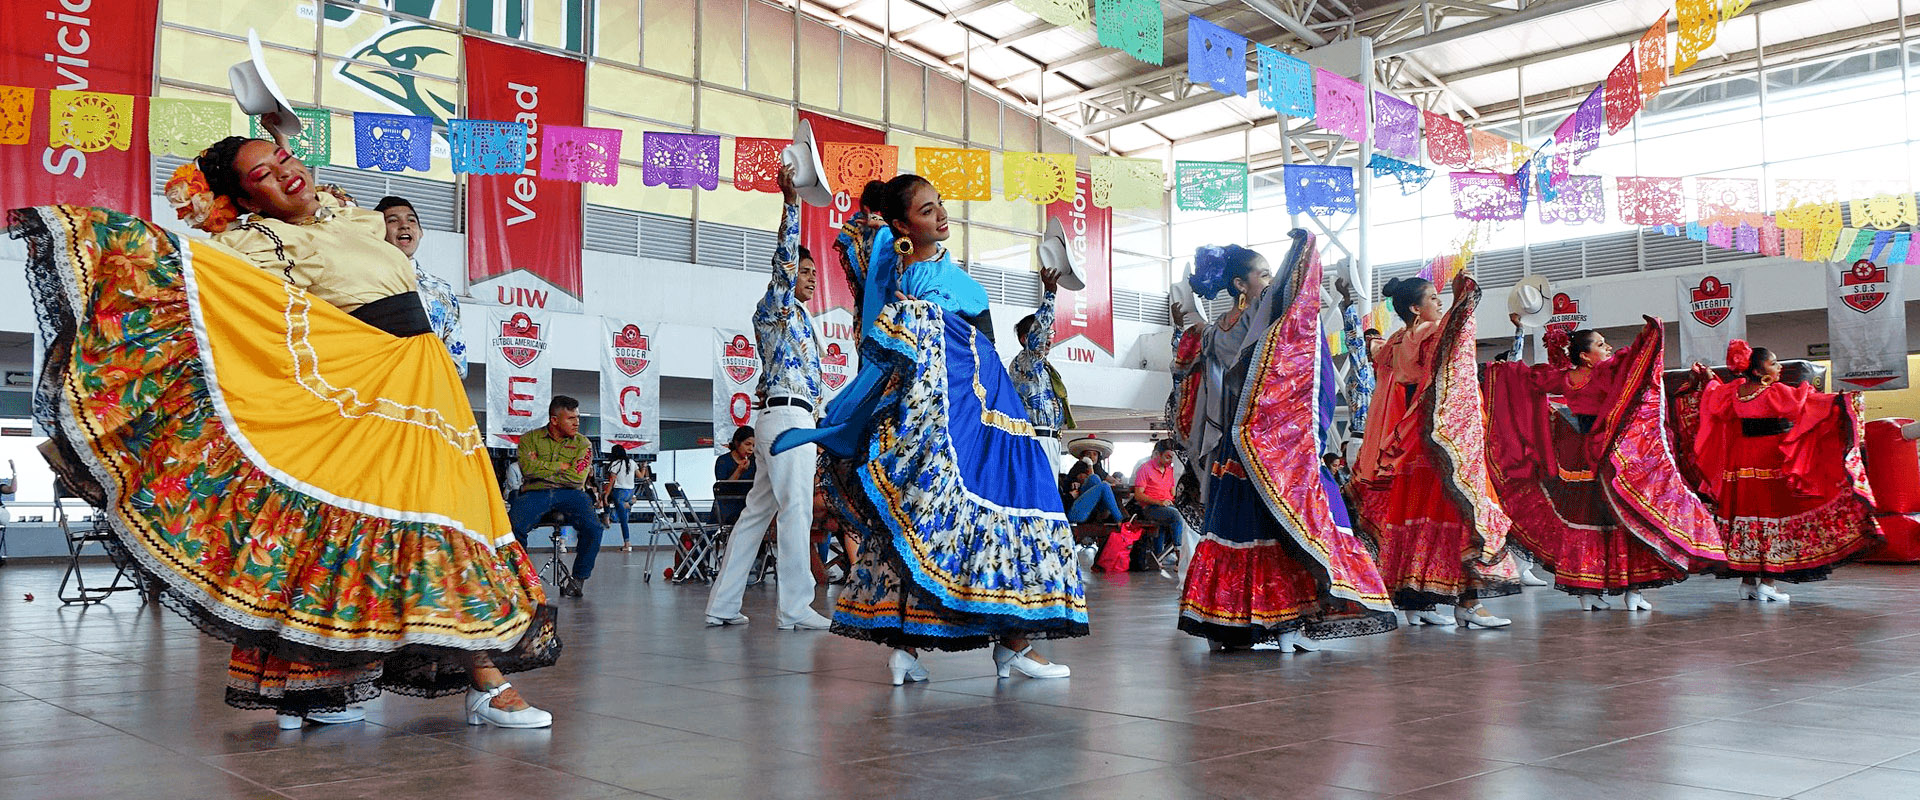 Men and Women performing a traditional Mexican dance on the UIW Bajío campus